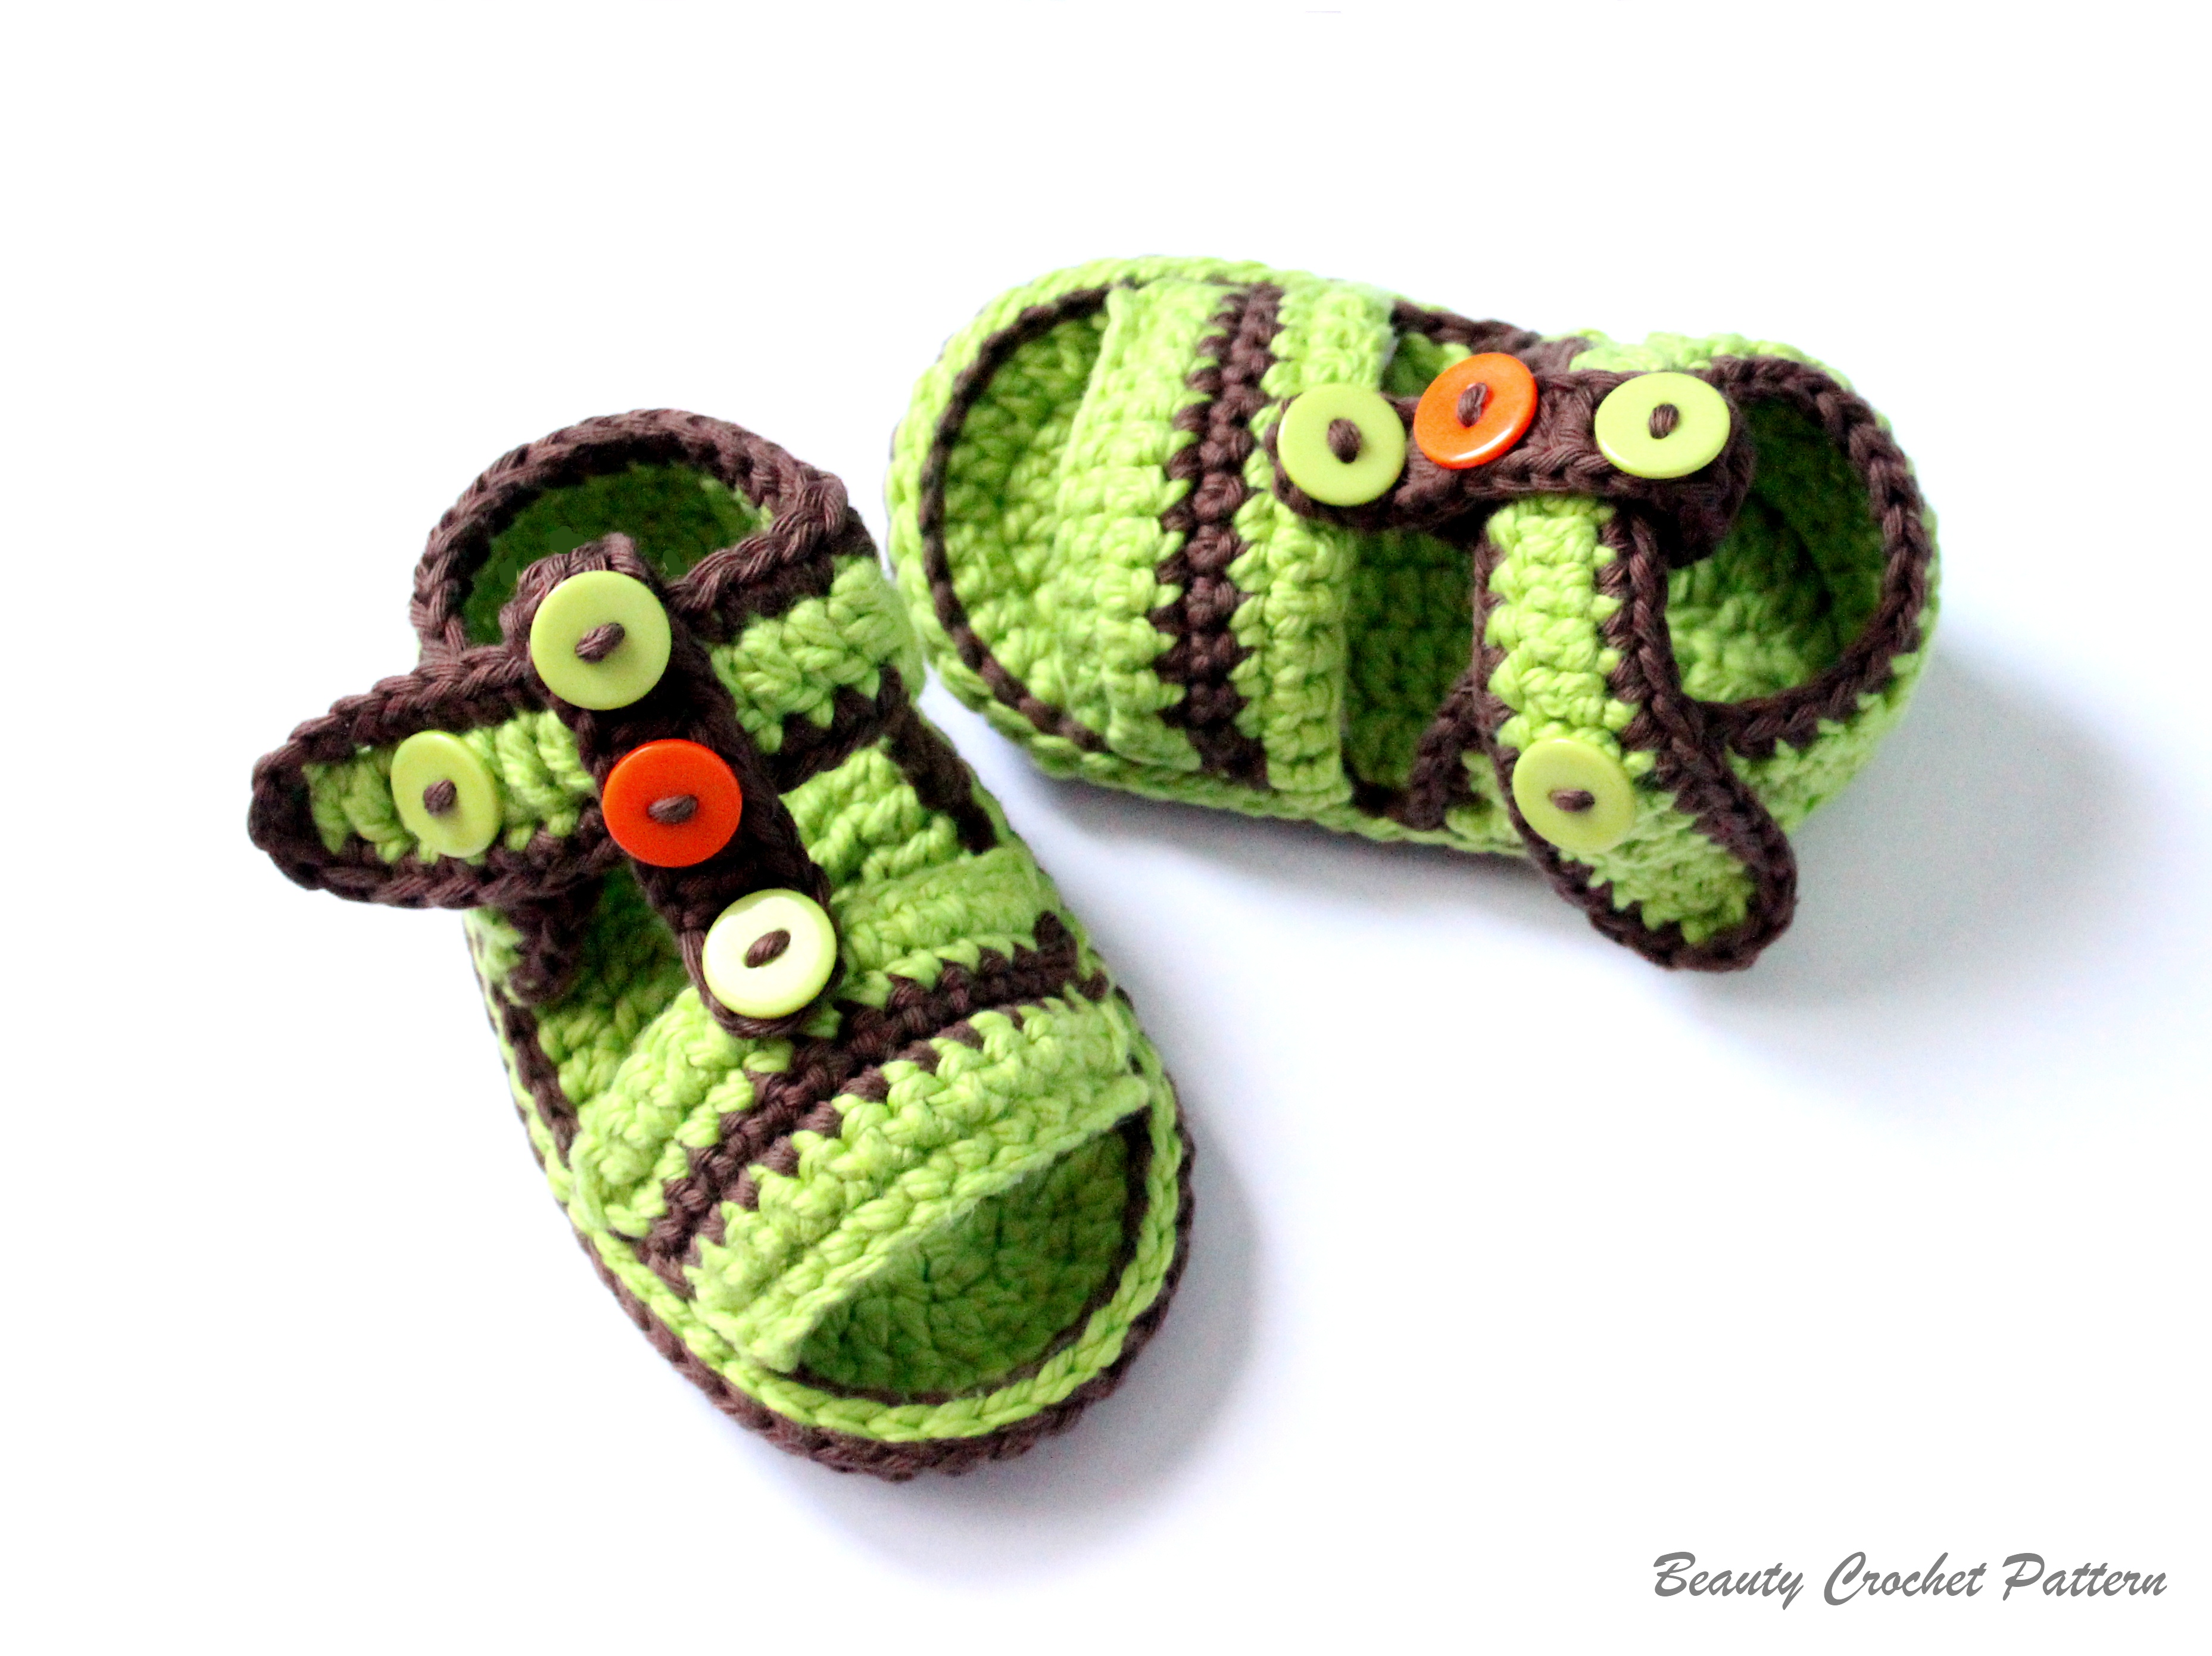 baby boy slippers size 3